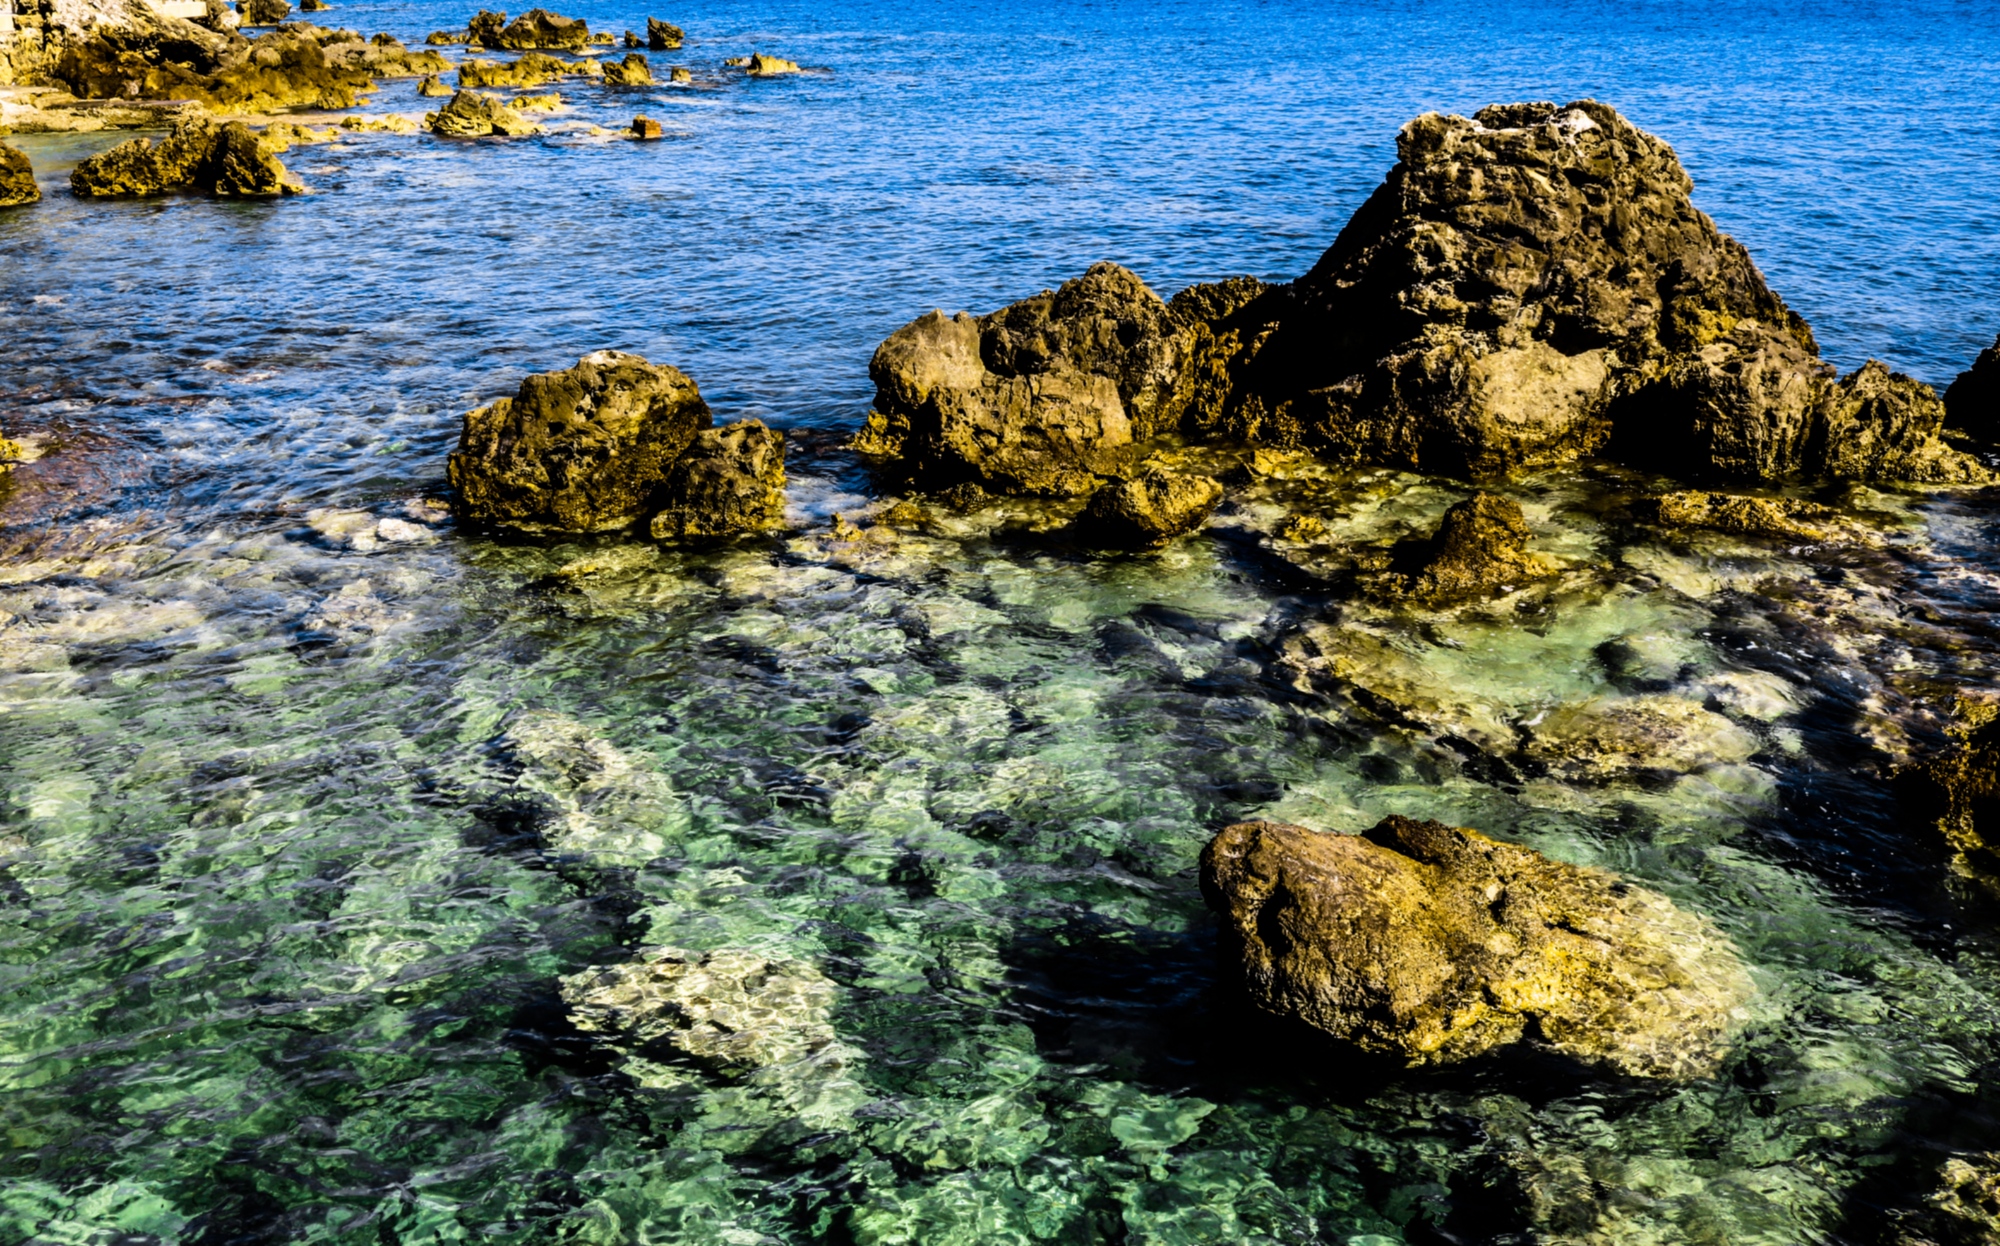 The crystal-clear waters in the Castiglioncello bay